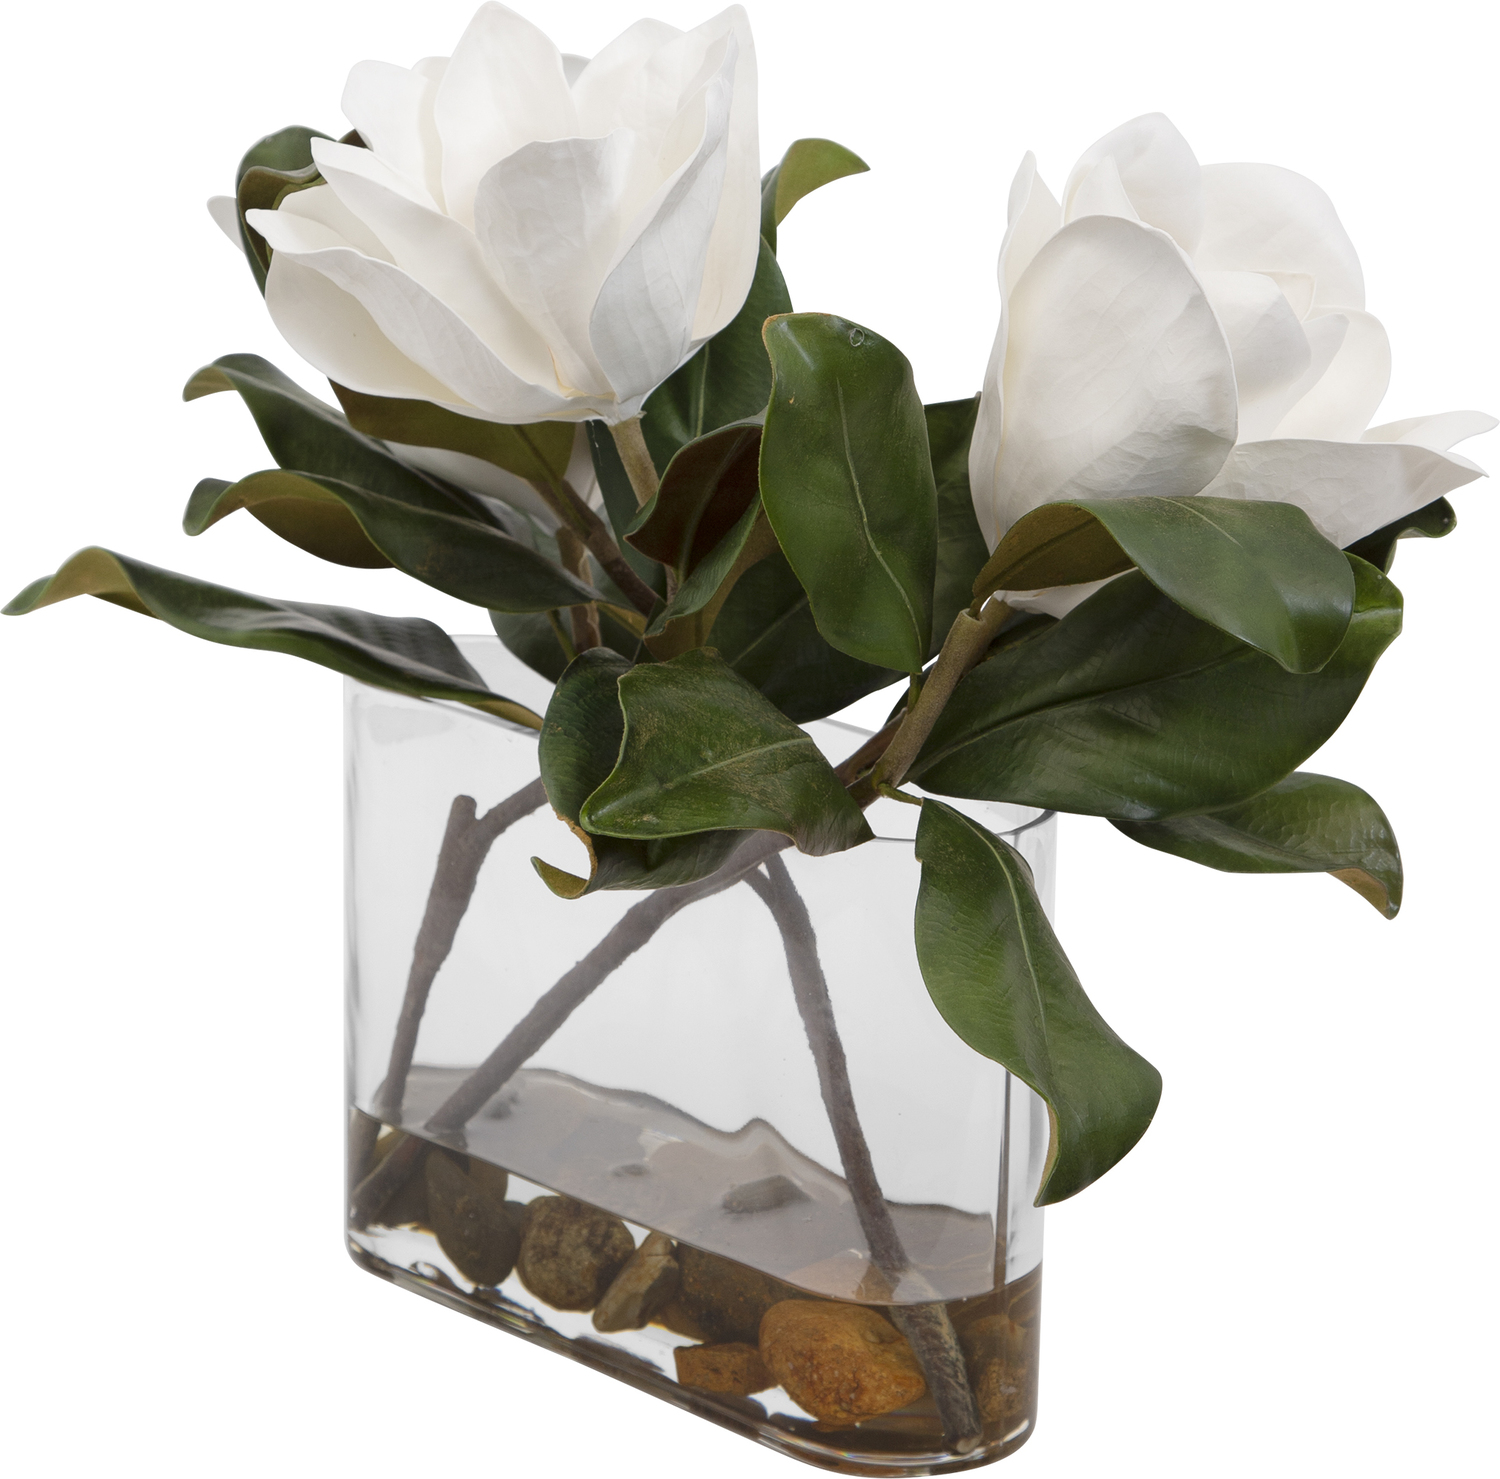 topiary tree centerpieces Uttermost Artificial Flowers / Centerpiece A Trio Of White Magnolia Blooms Are Placed In A Clear Glass Vase With Faux Water And Natural River Stones.